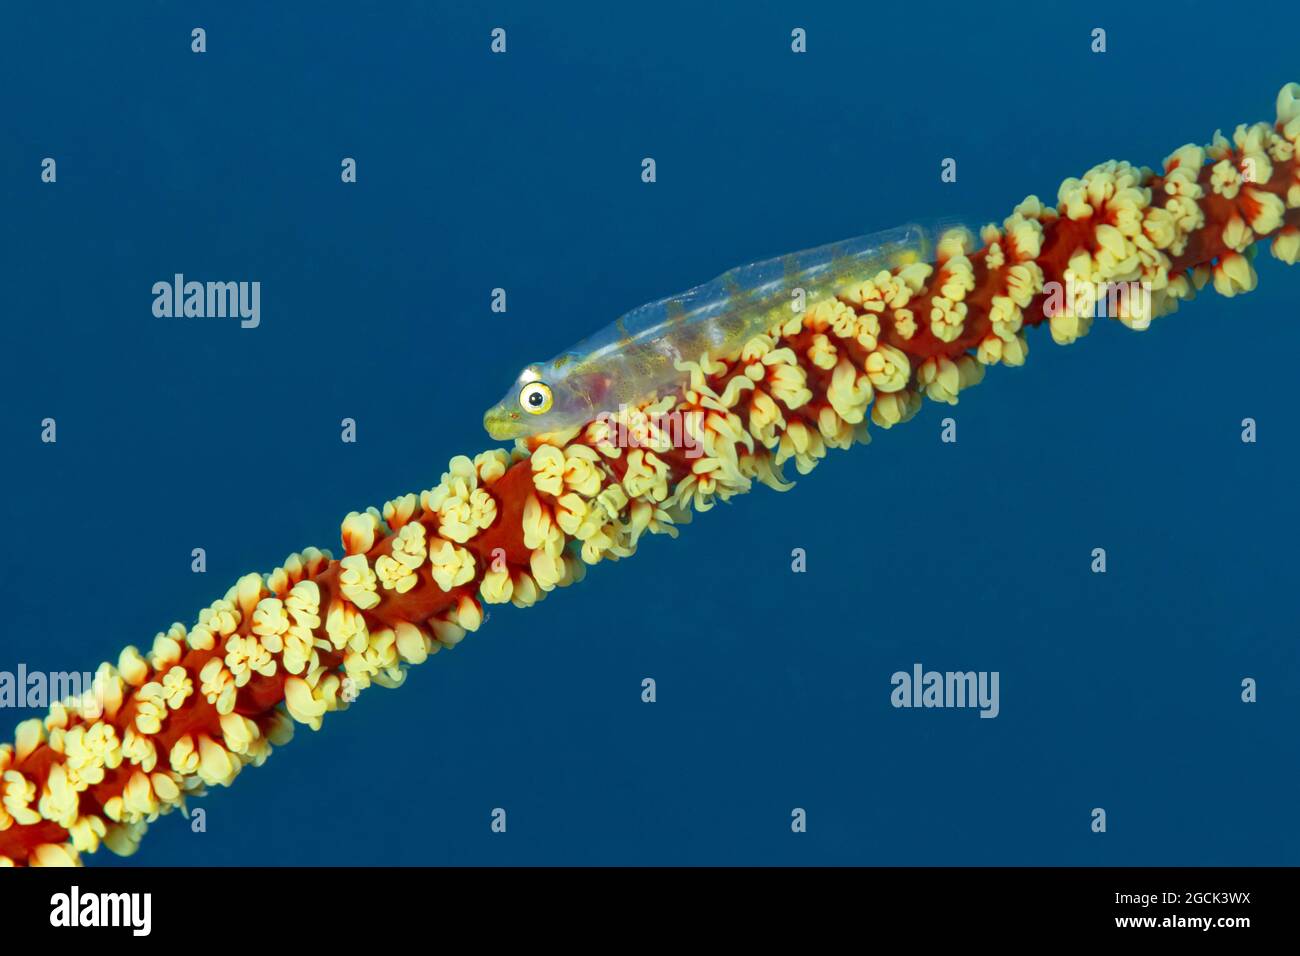 Closeup of tiny semi transparent Bryaninops yongei or Whip coral goby fish near Cirripathes anguina coral in dark sea water Stock Photo